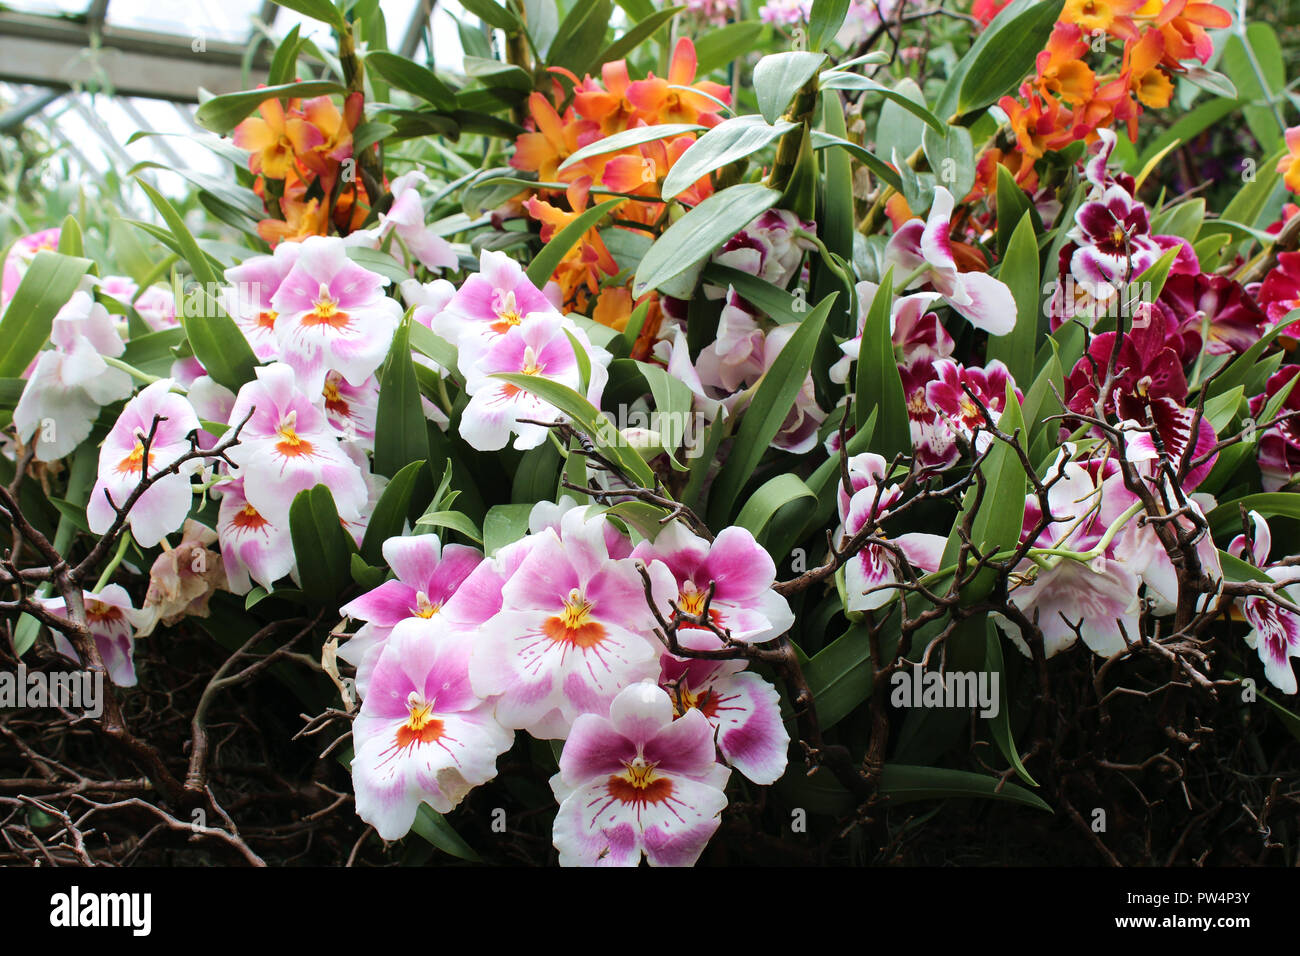 A grouping of pink, white, orange and yellow Miltoniopsis orchid flowers in full bloom surrounded by branches, orange Cattleya and red Miltoniopsis or Stock Photo